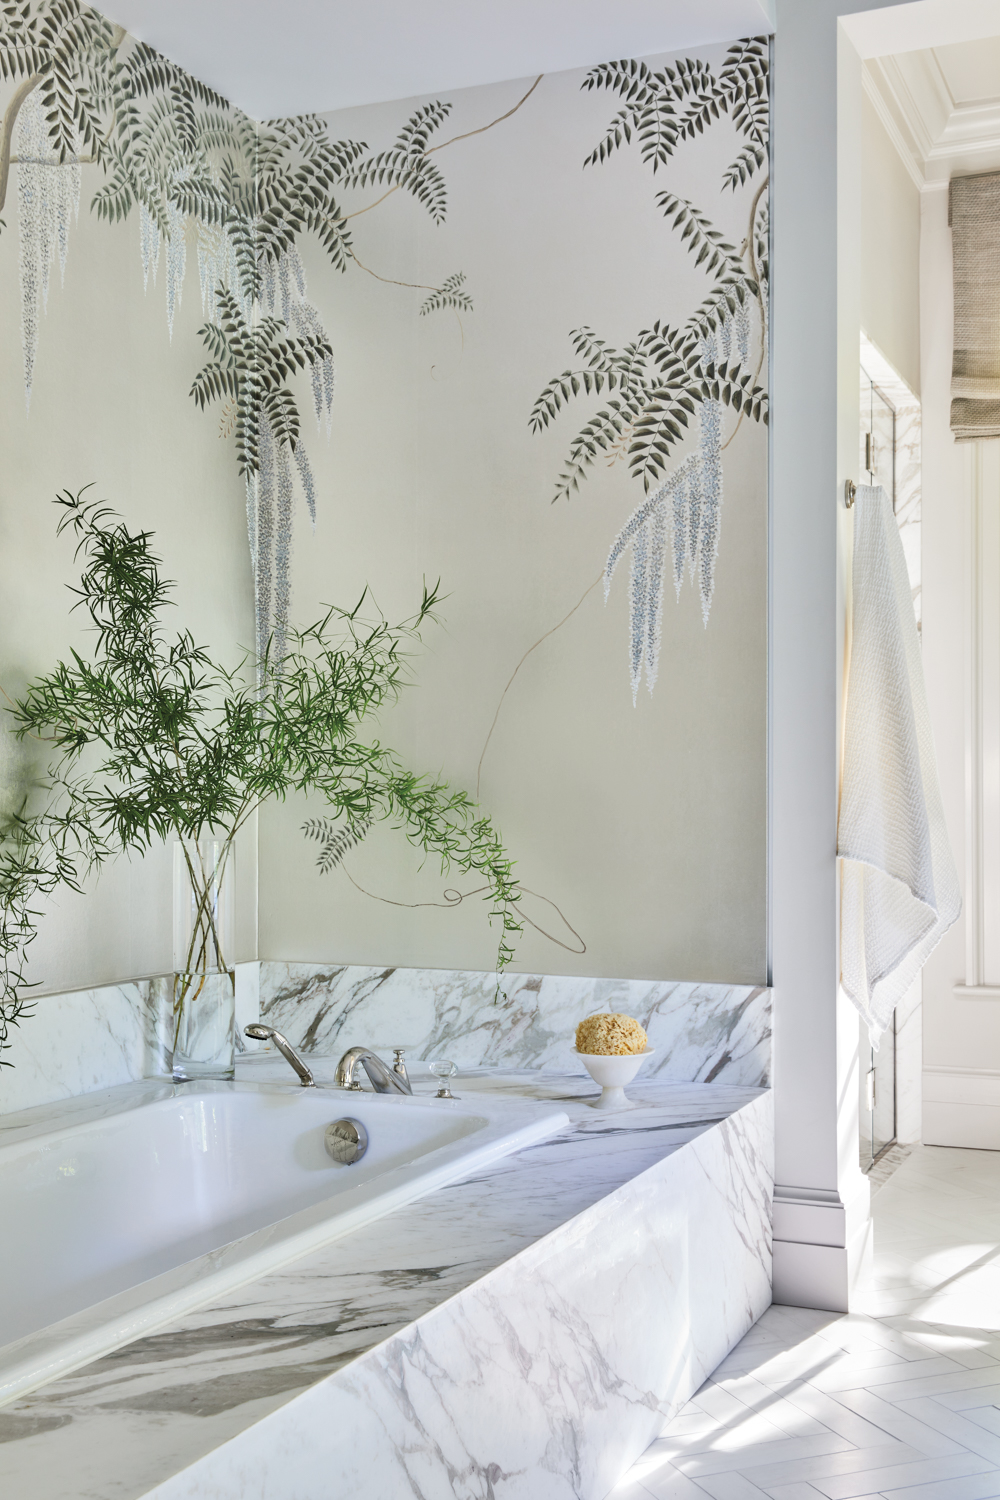 marble bathroom with chinoiserie wallpaper...